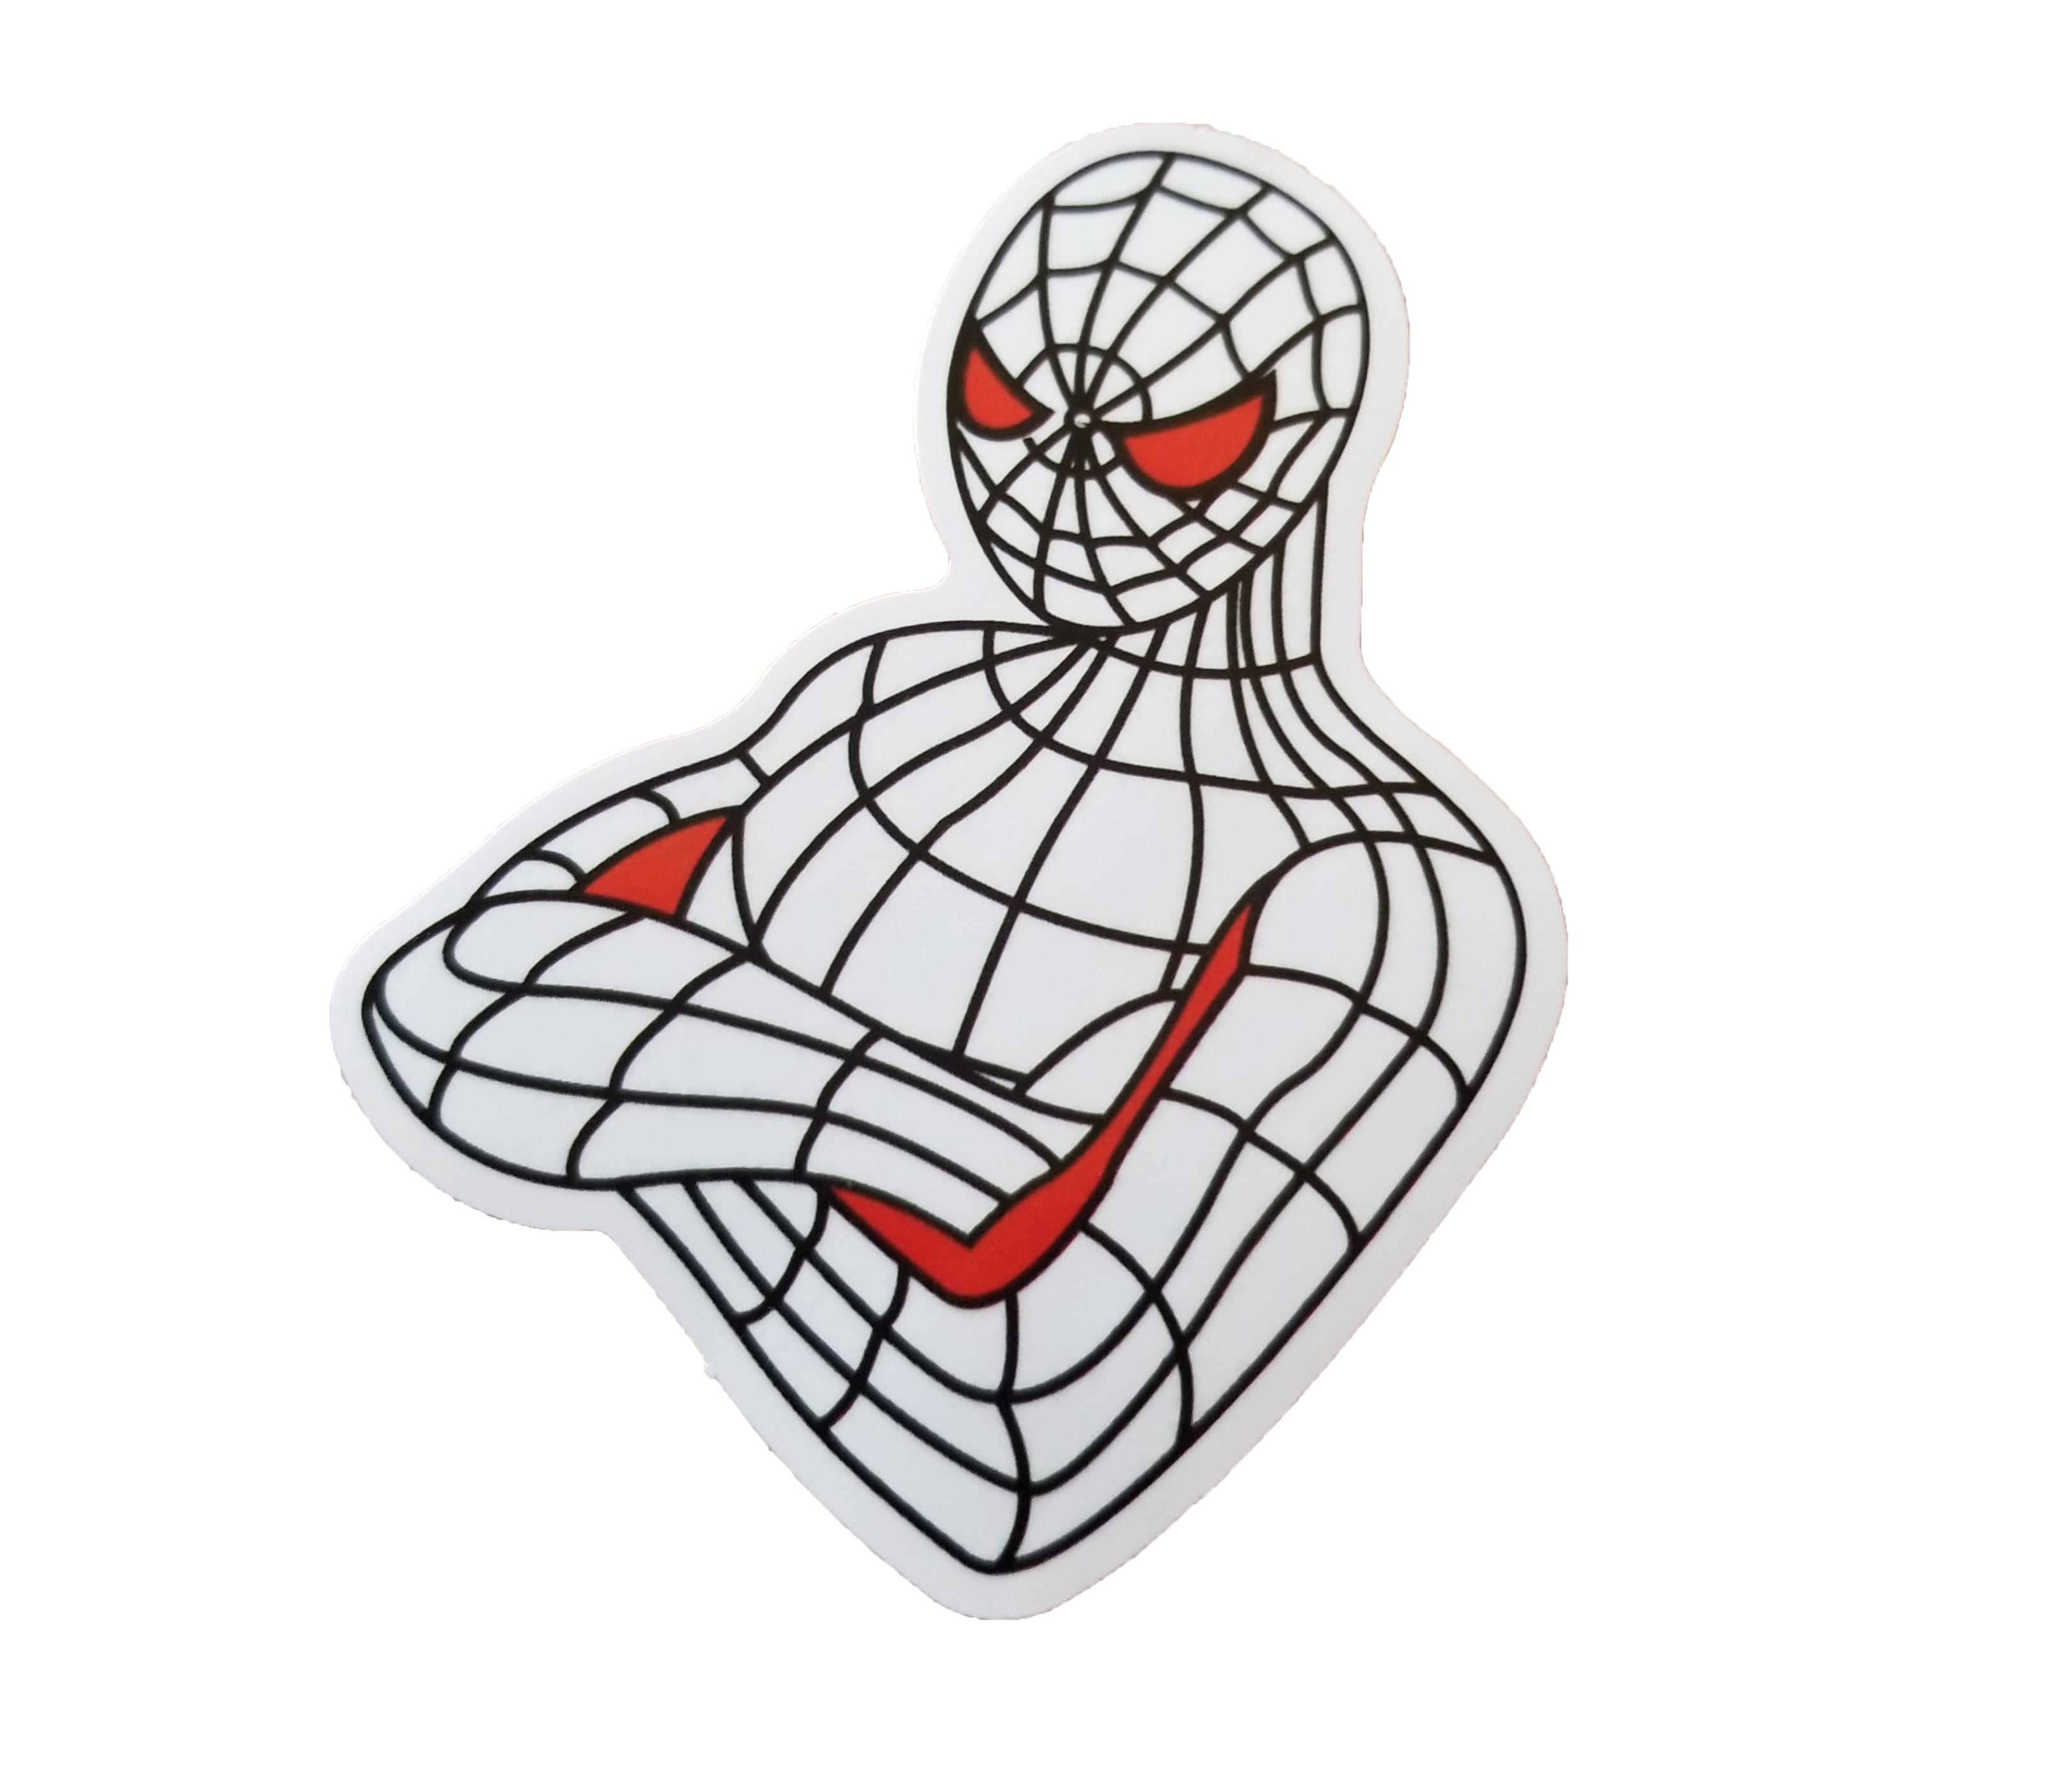 White and red Spiderman, Spidey has red eyes and a bit of red on his folded arms. The rest of Spiderman's suit is white